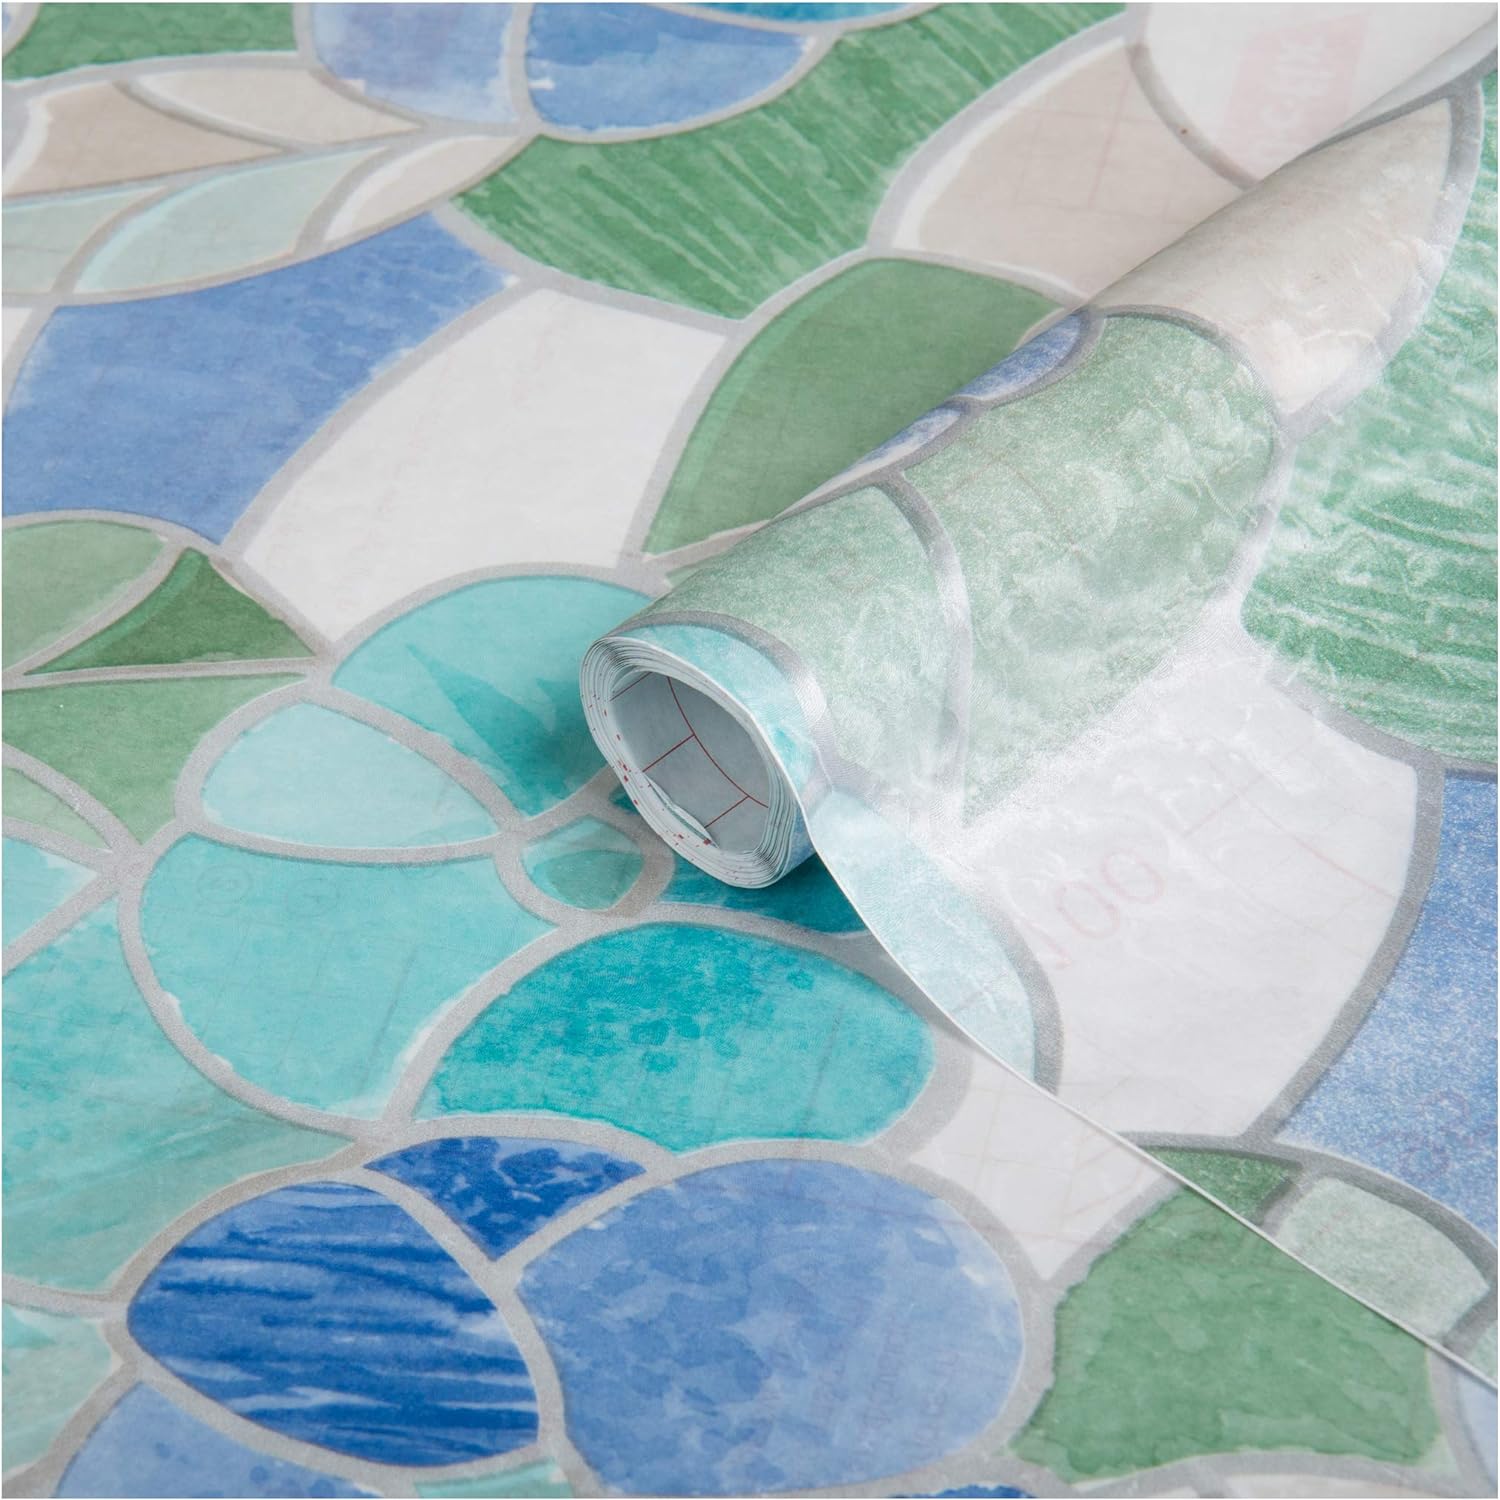 Brewster Blue and Green Stained Glass Peel and Stick Window Film - image 1 of 6